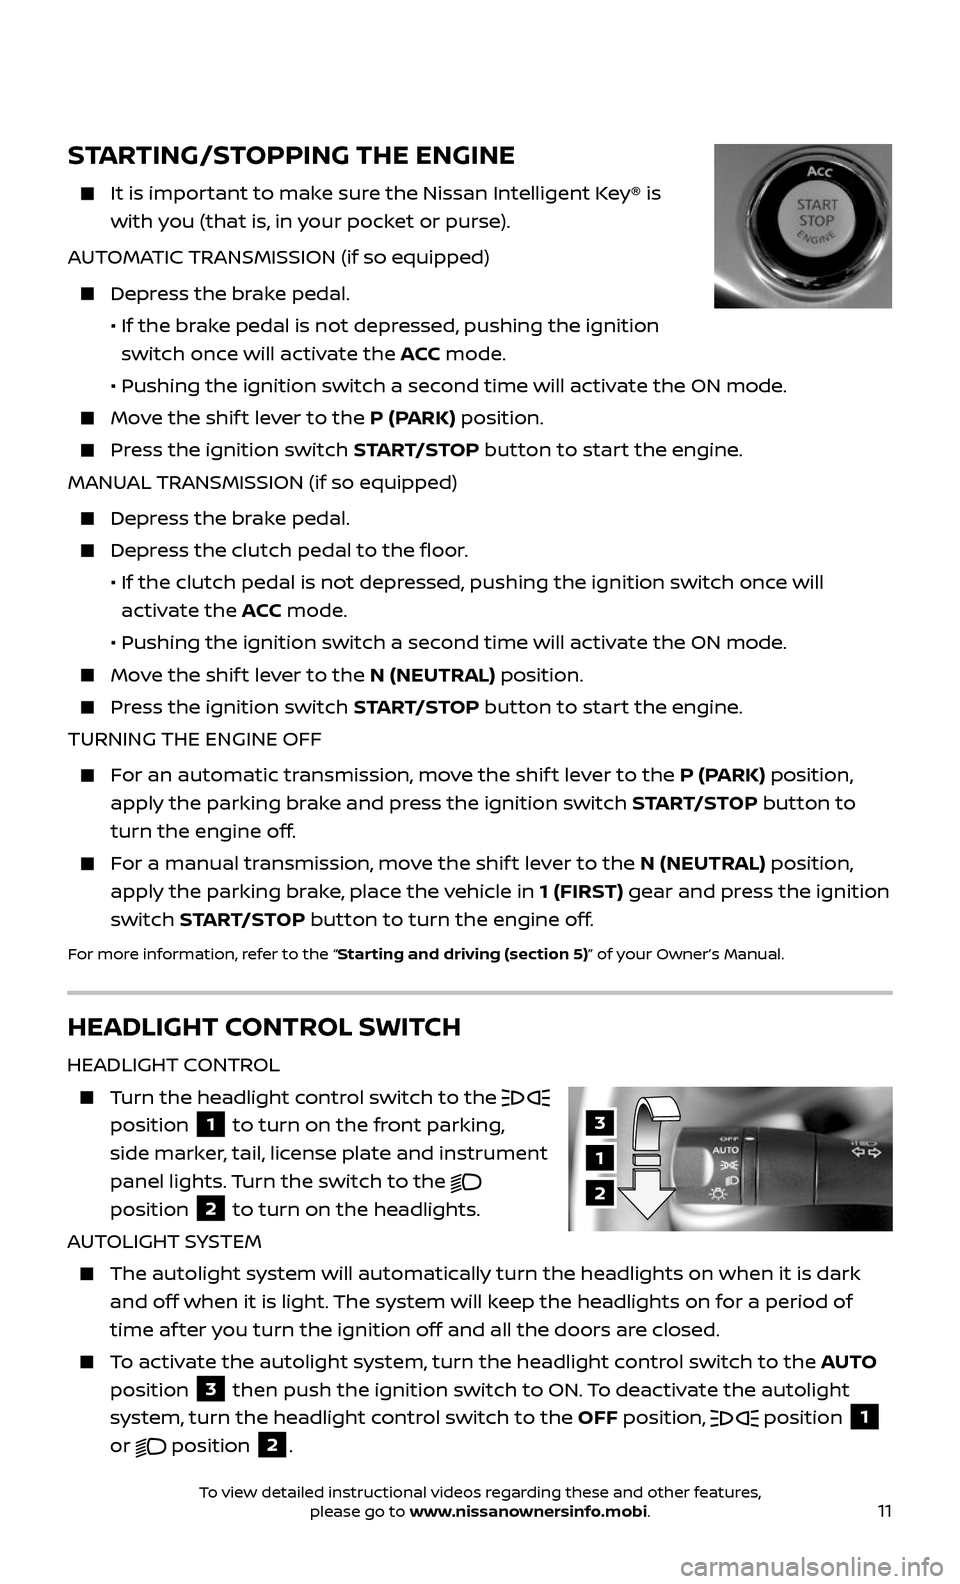 NISSAN 370Z ROADSTER 2017 Z34 Quick Reference Guide 11
3
1
2
HEADLIGHT CONTROL SWITCH
HEADLIGHT CONTROL
    Turn the headlight control switch to the  
position 1 to turn on the front parking, 
side marker, tail, license plate and instrument 
panel ligh